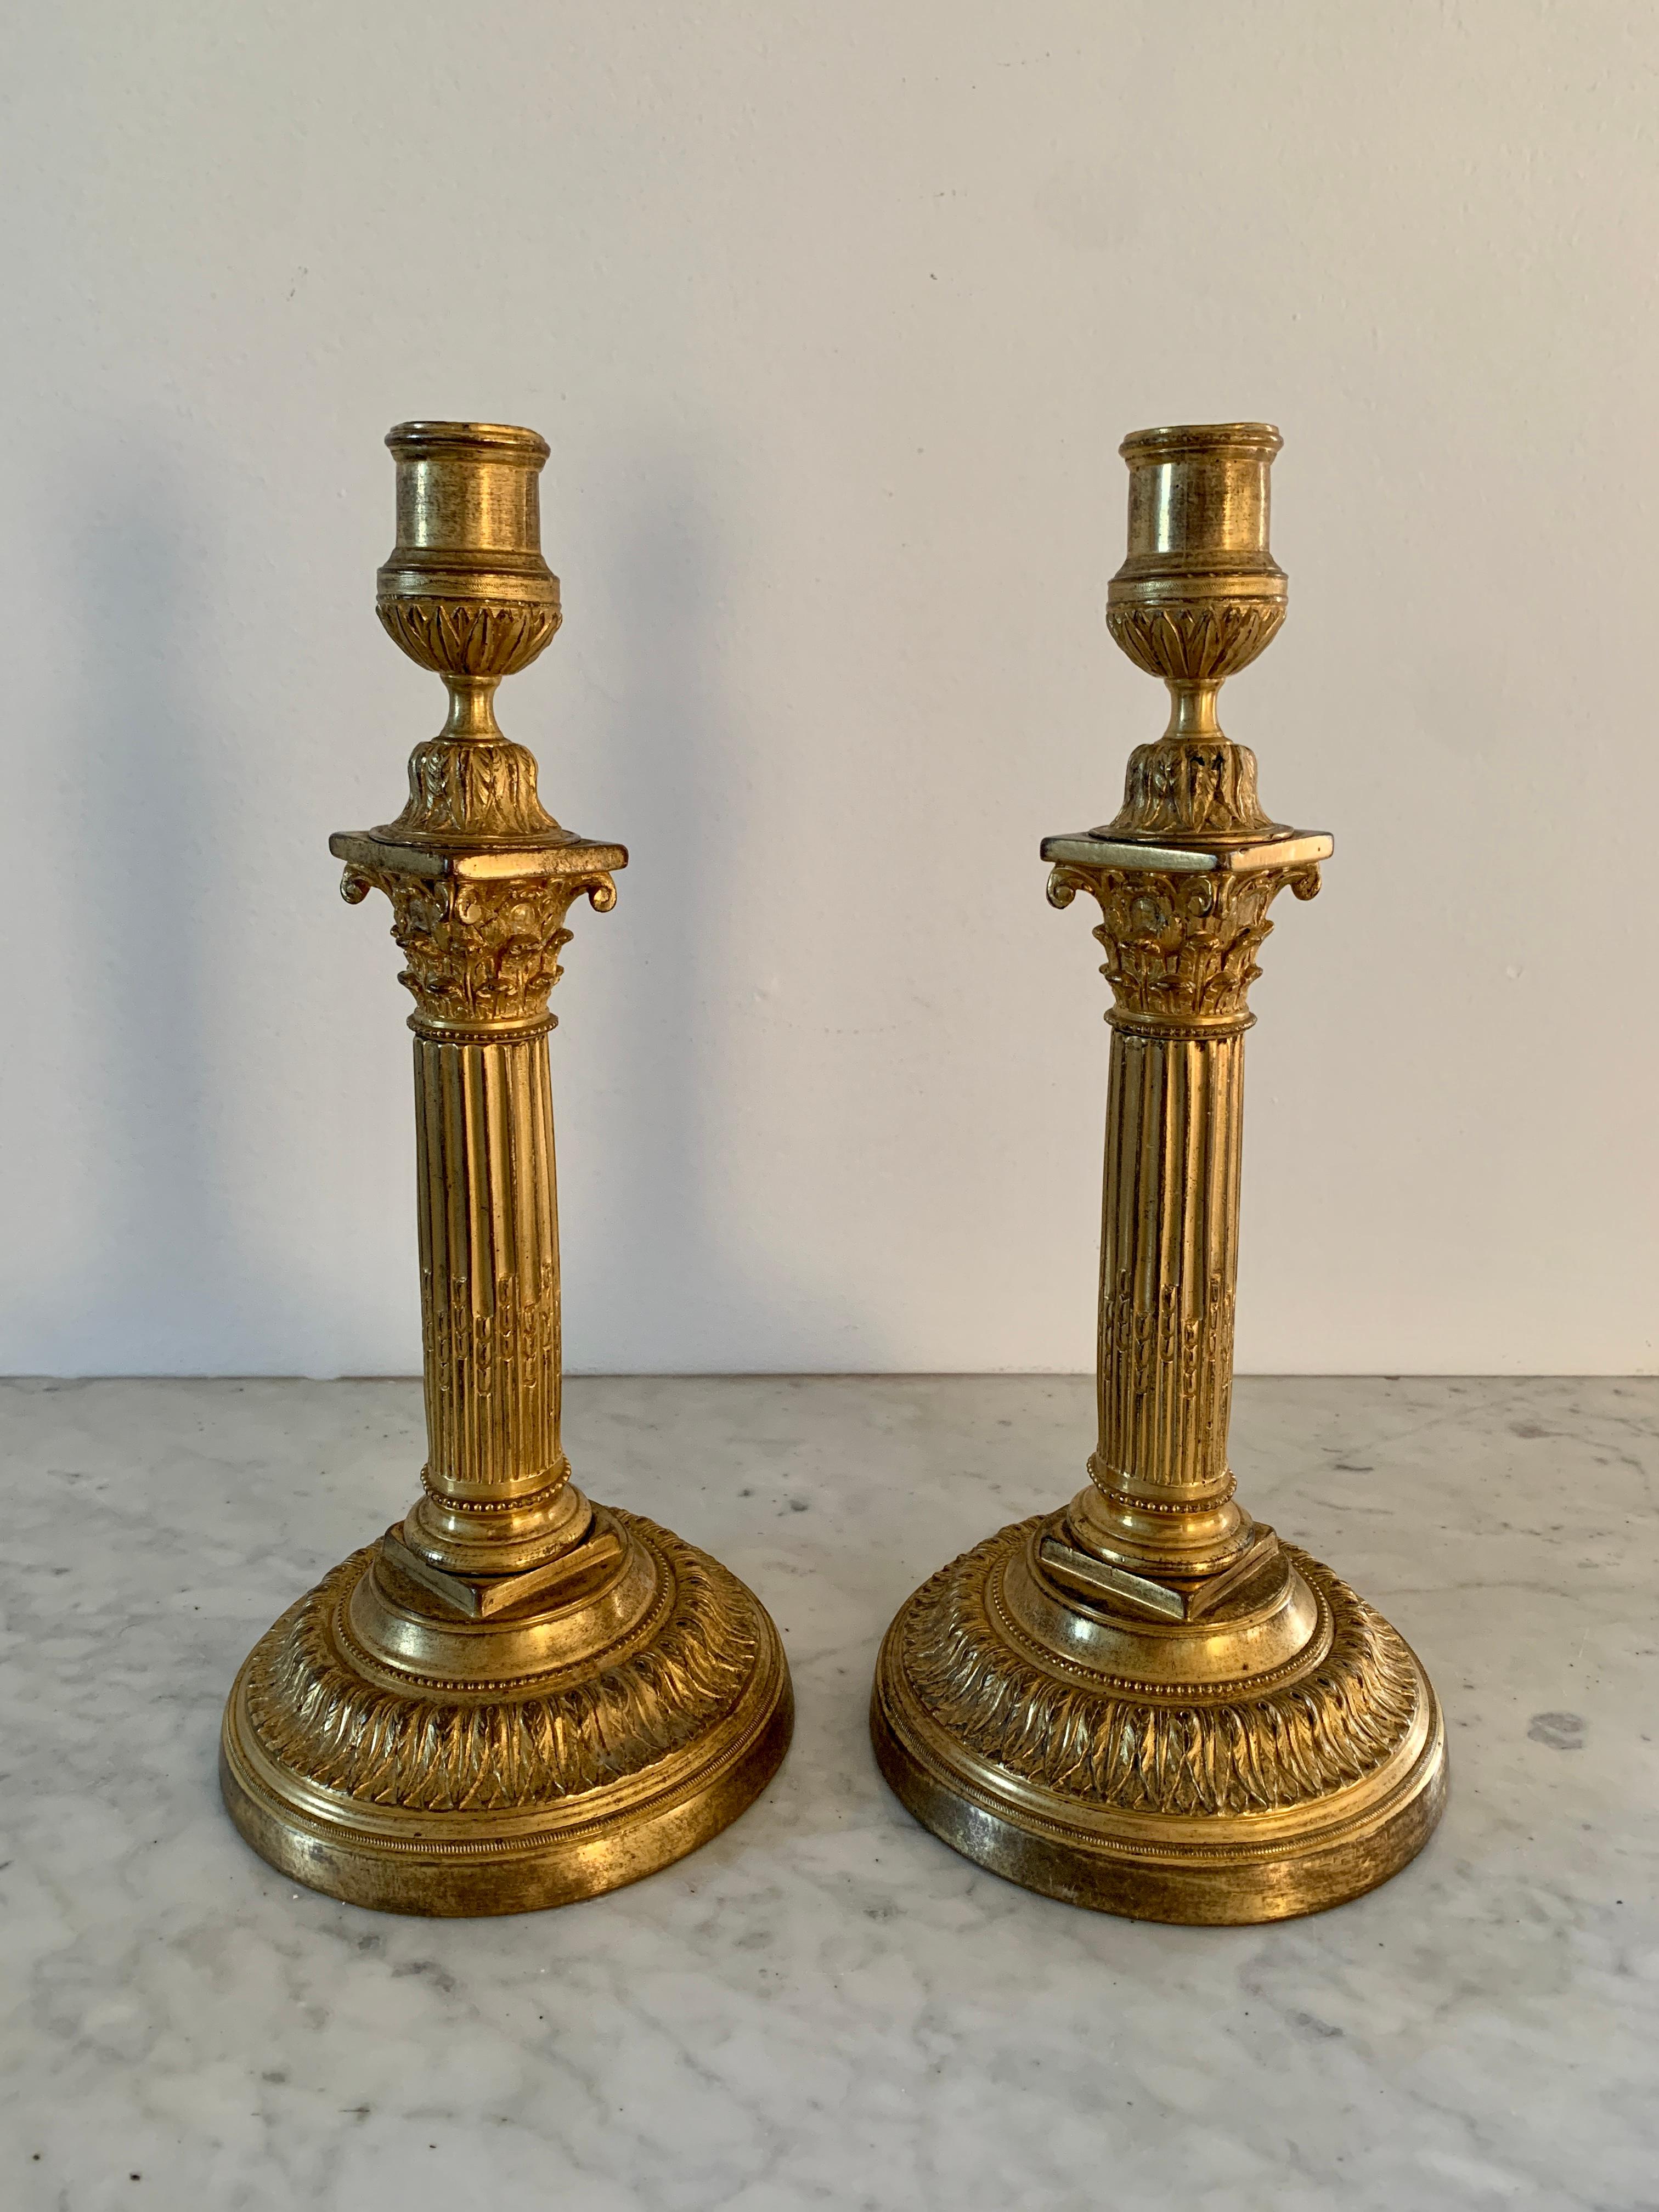 A gorgeous pair of grand tour neoclassical gilded bronze Corinthian column candlestick holders

Italy, circa Mid-19th Century

Measures: 5.5